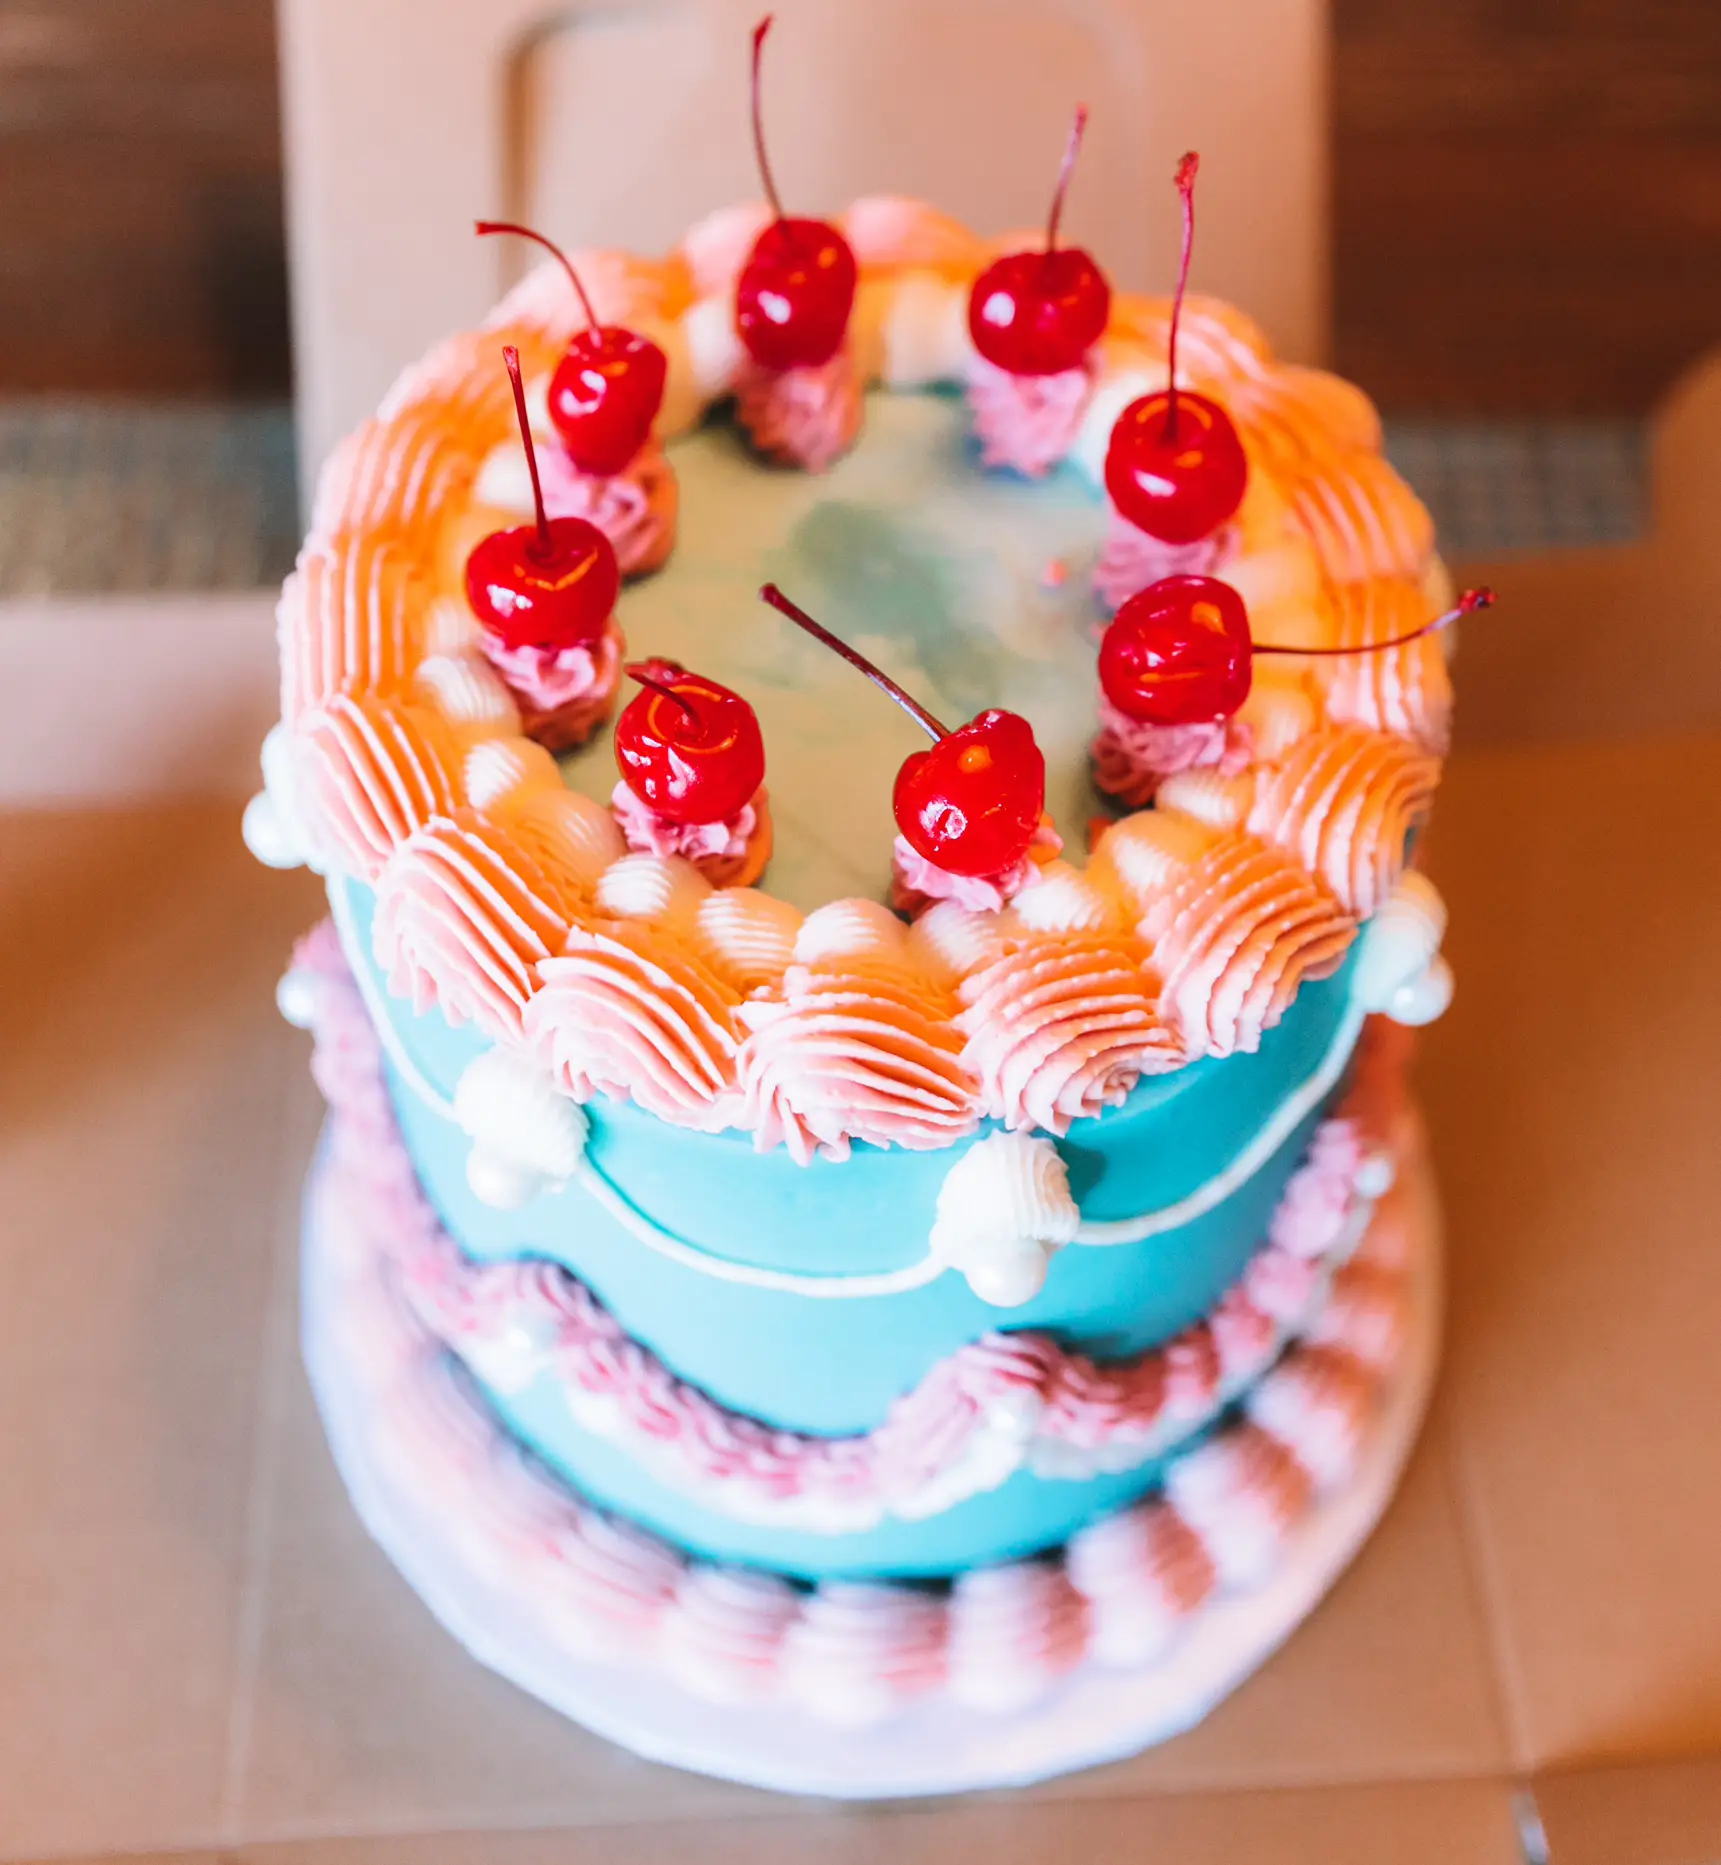 Glitter Cherry Cake - Hayley Cakes and Cookies Hayley Cakes and